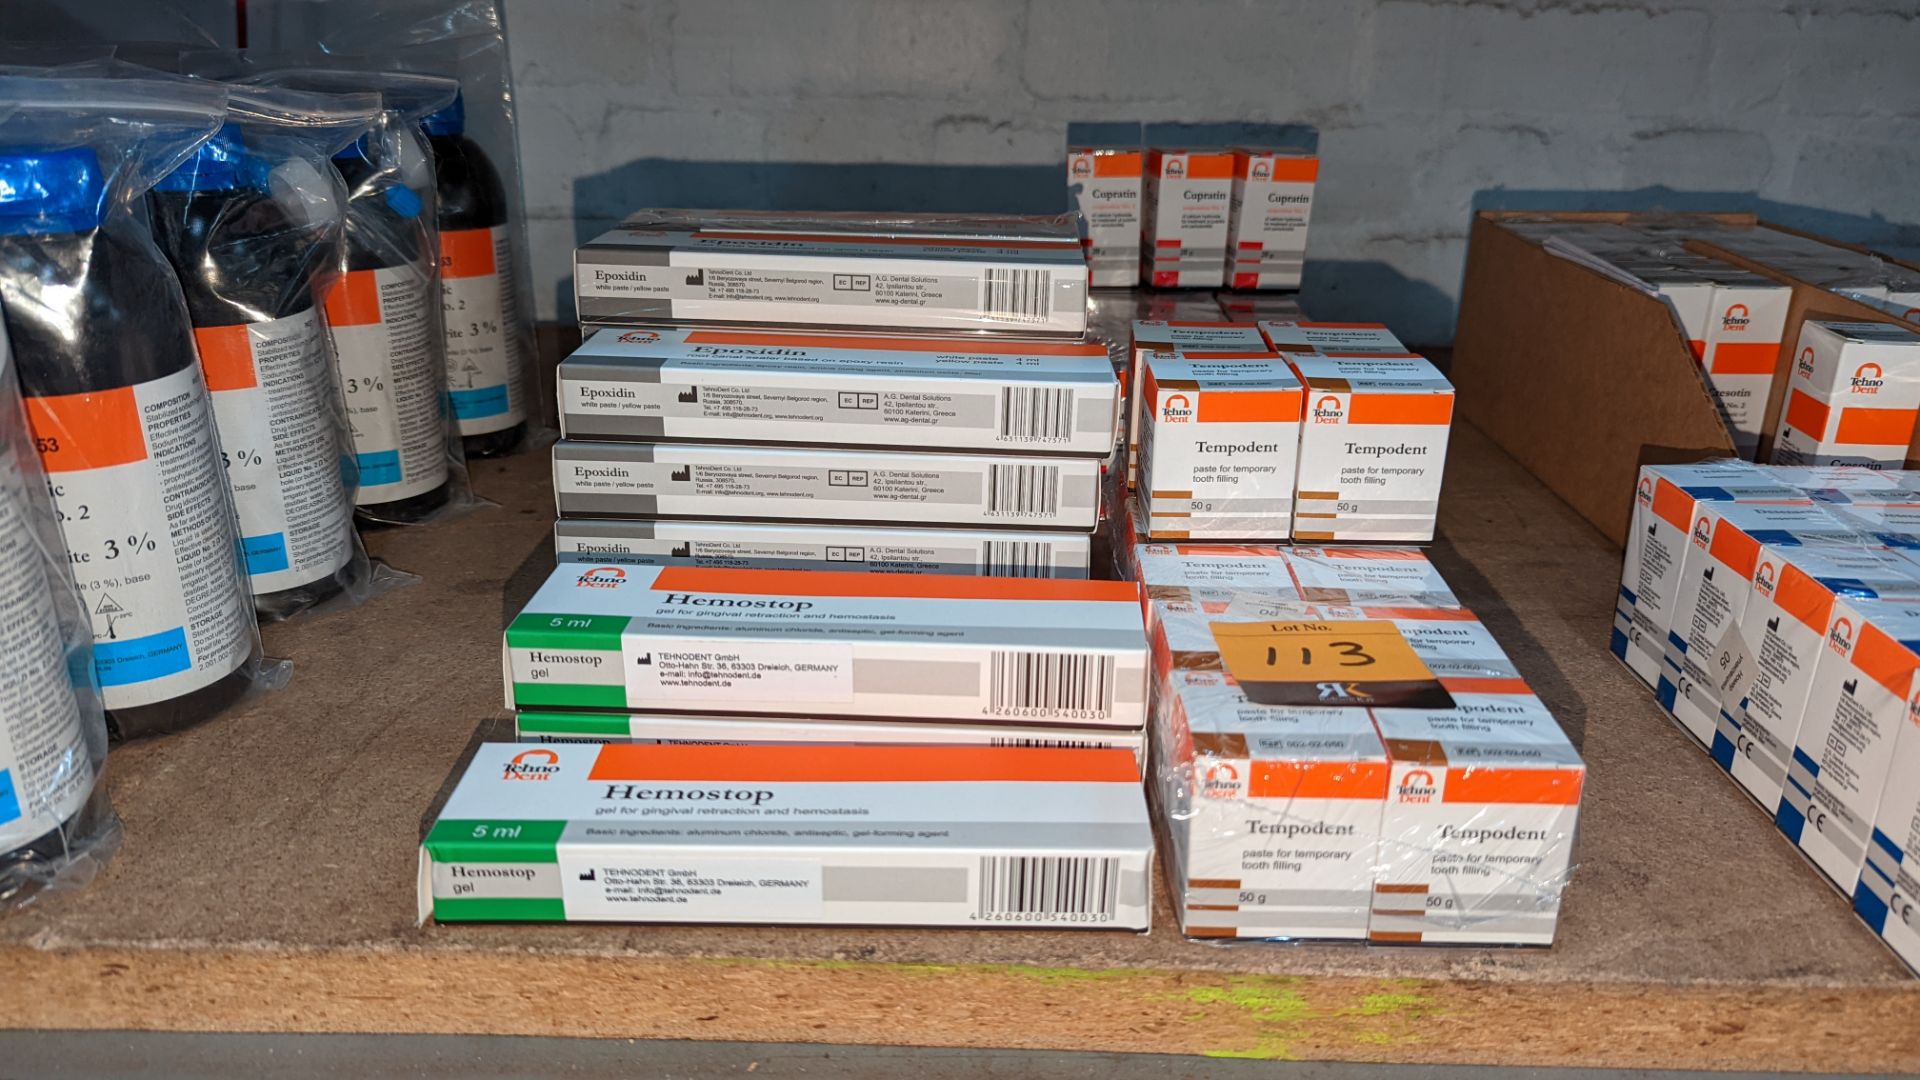 Quantity of Tempodent, Cupratin, Hemostop & Epoxidin product - 49 boxes in total - Image 2 of 5